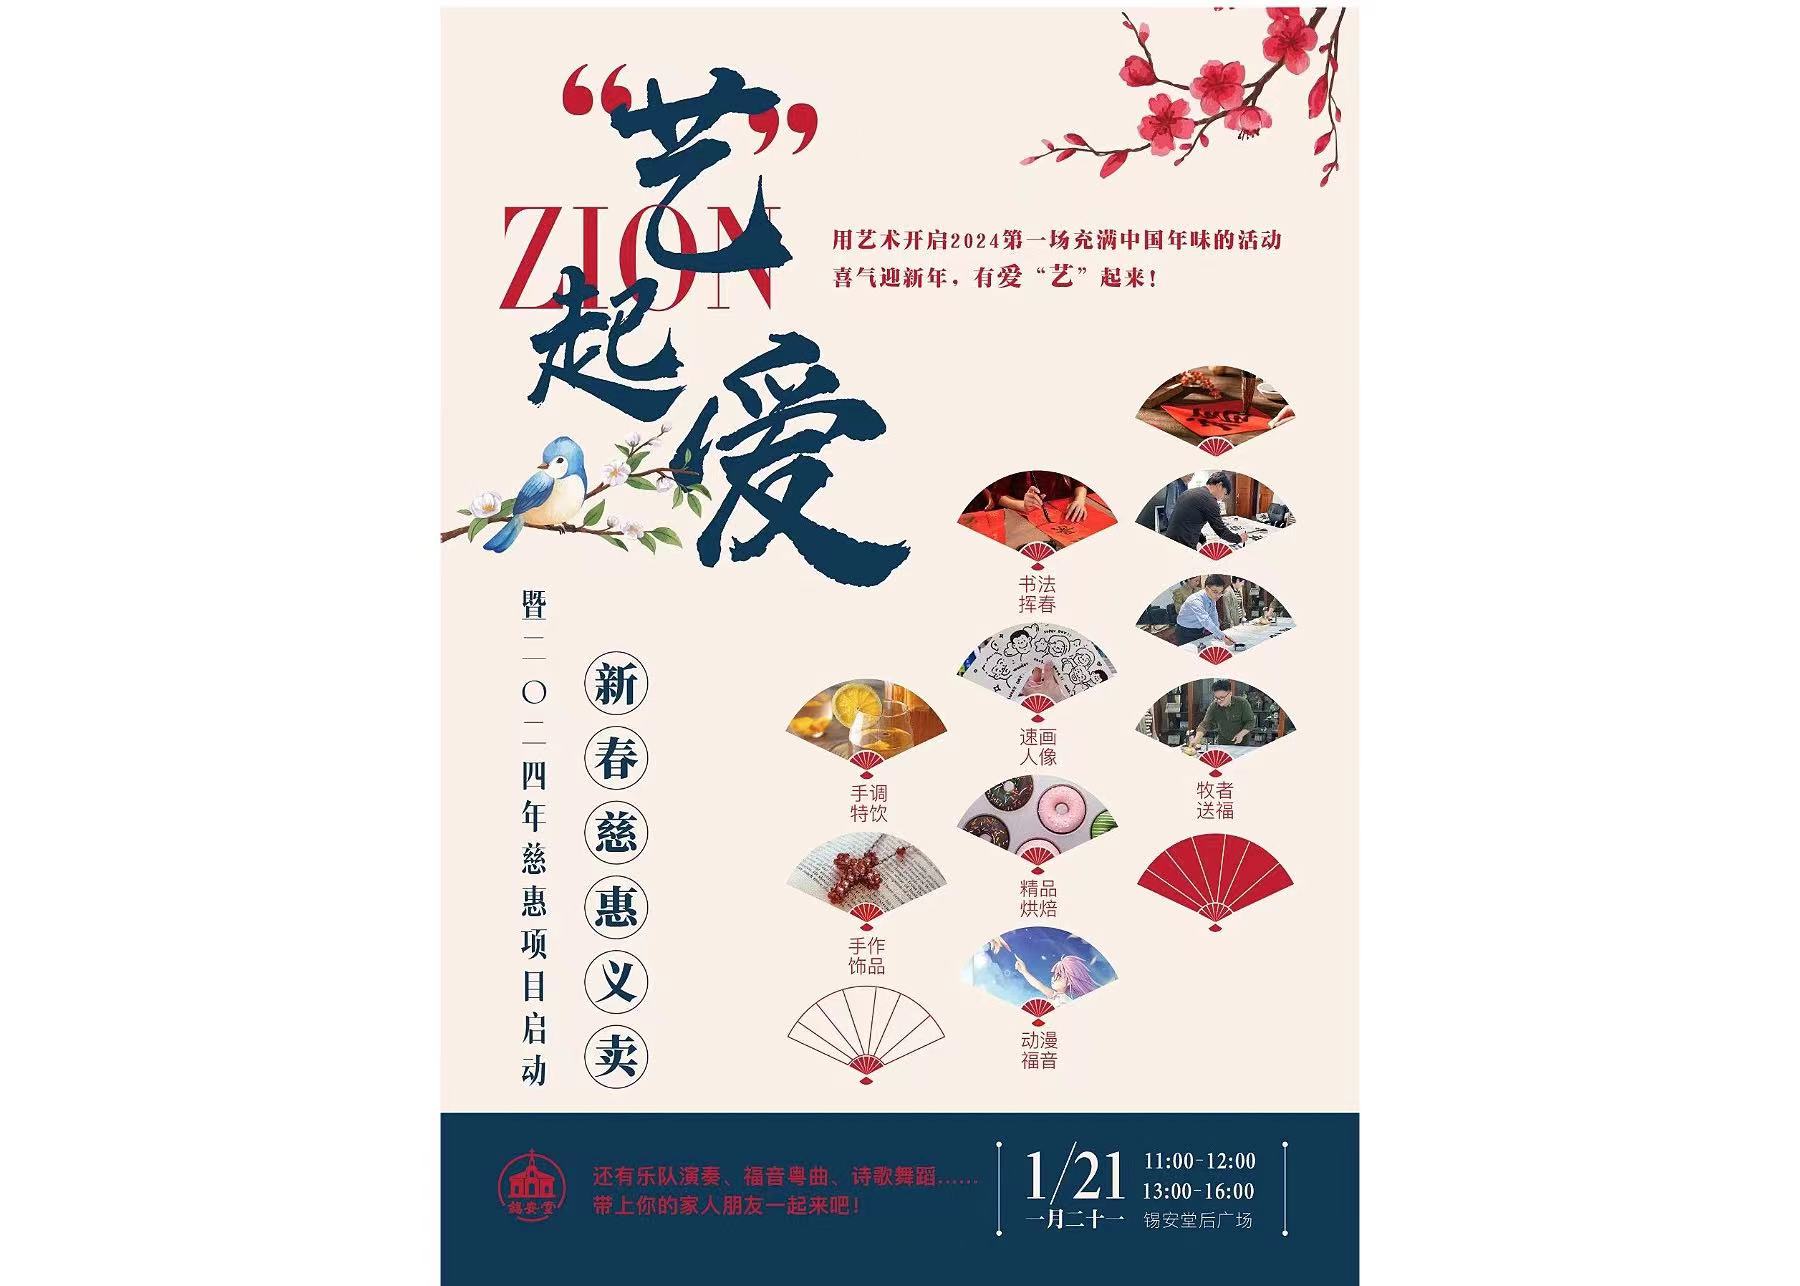 The poster of the Guangzhou Zion Church's first Chinese New Year-themed event